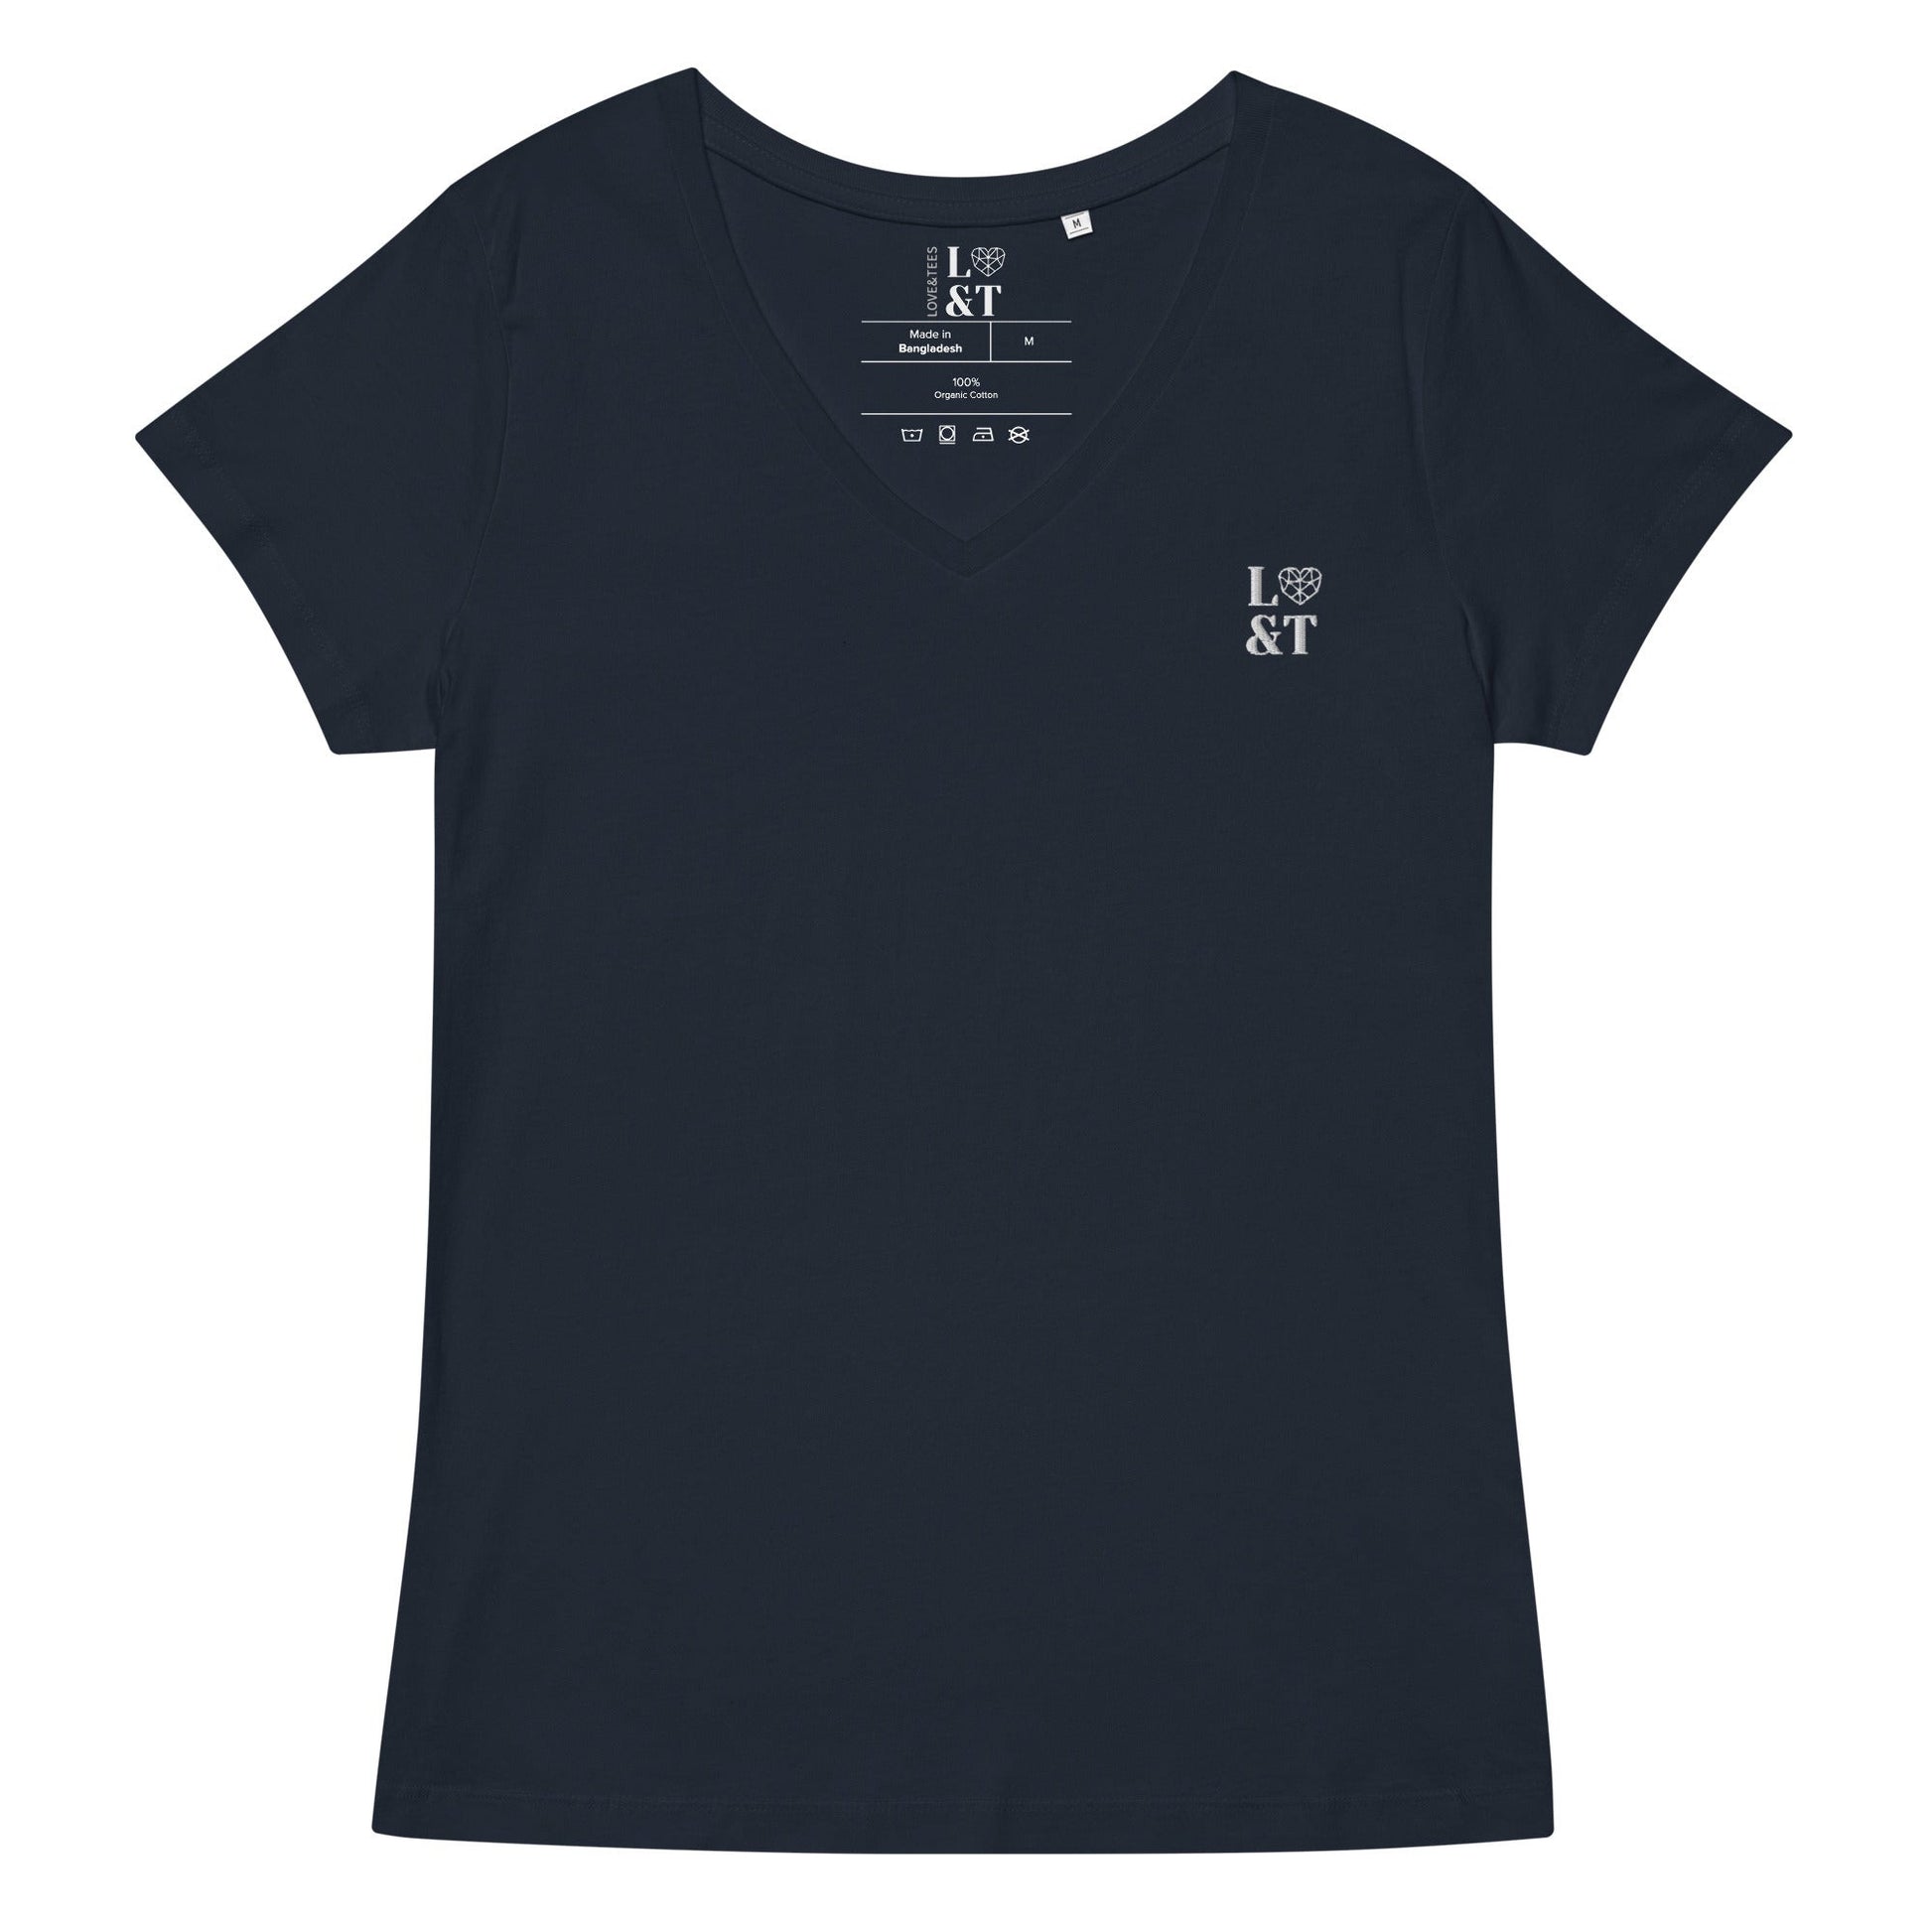 L&T's Women’s Fitted V-Neck T-Shirt - Love&Tees